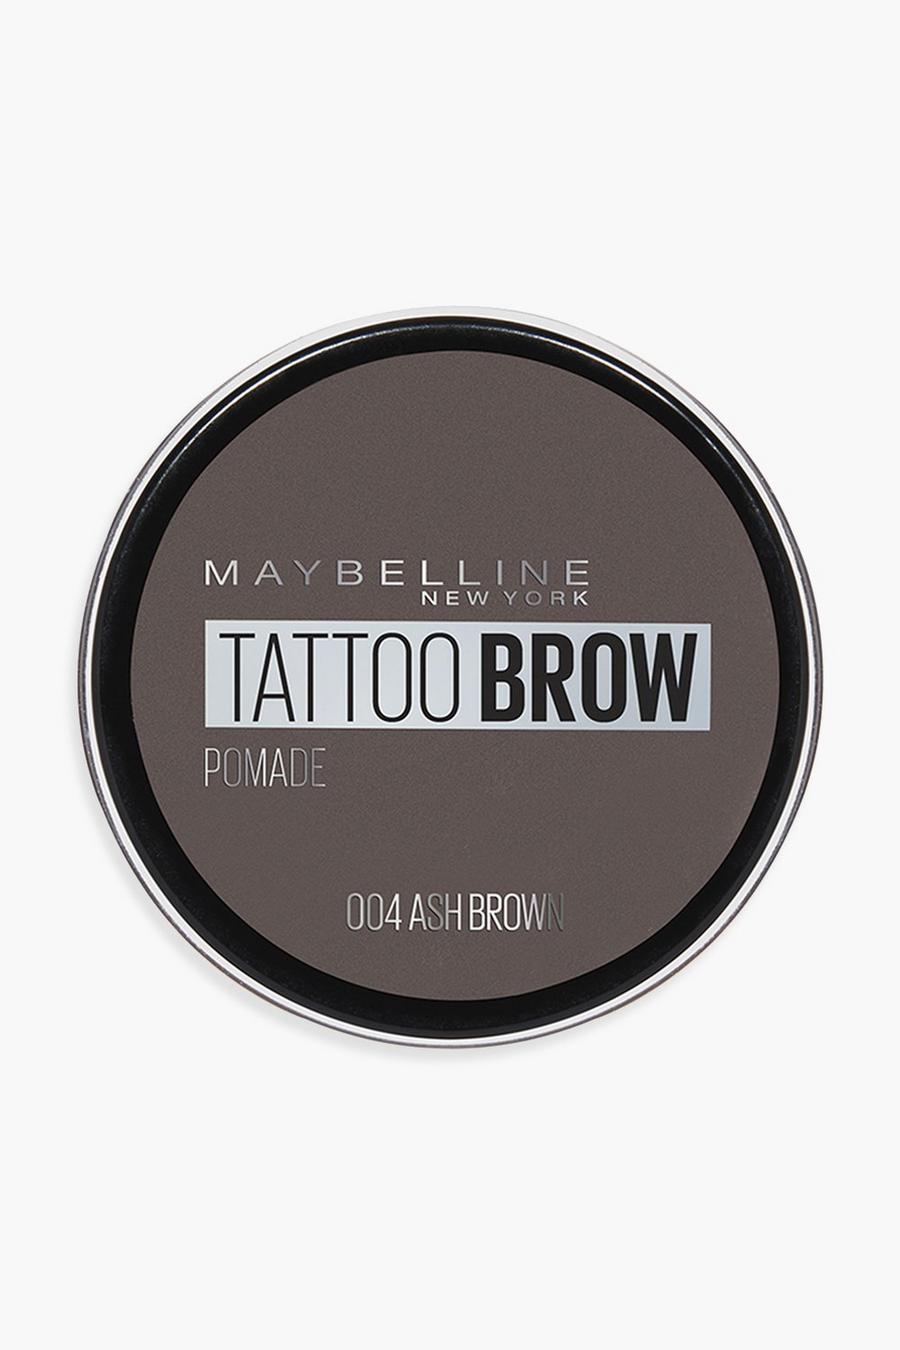 Maybelline Tattoo Brow Augenbrauen-Pomade, 04 ash brown